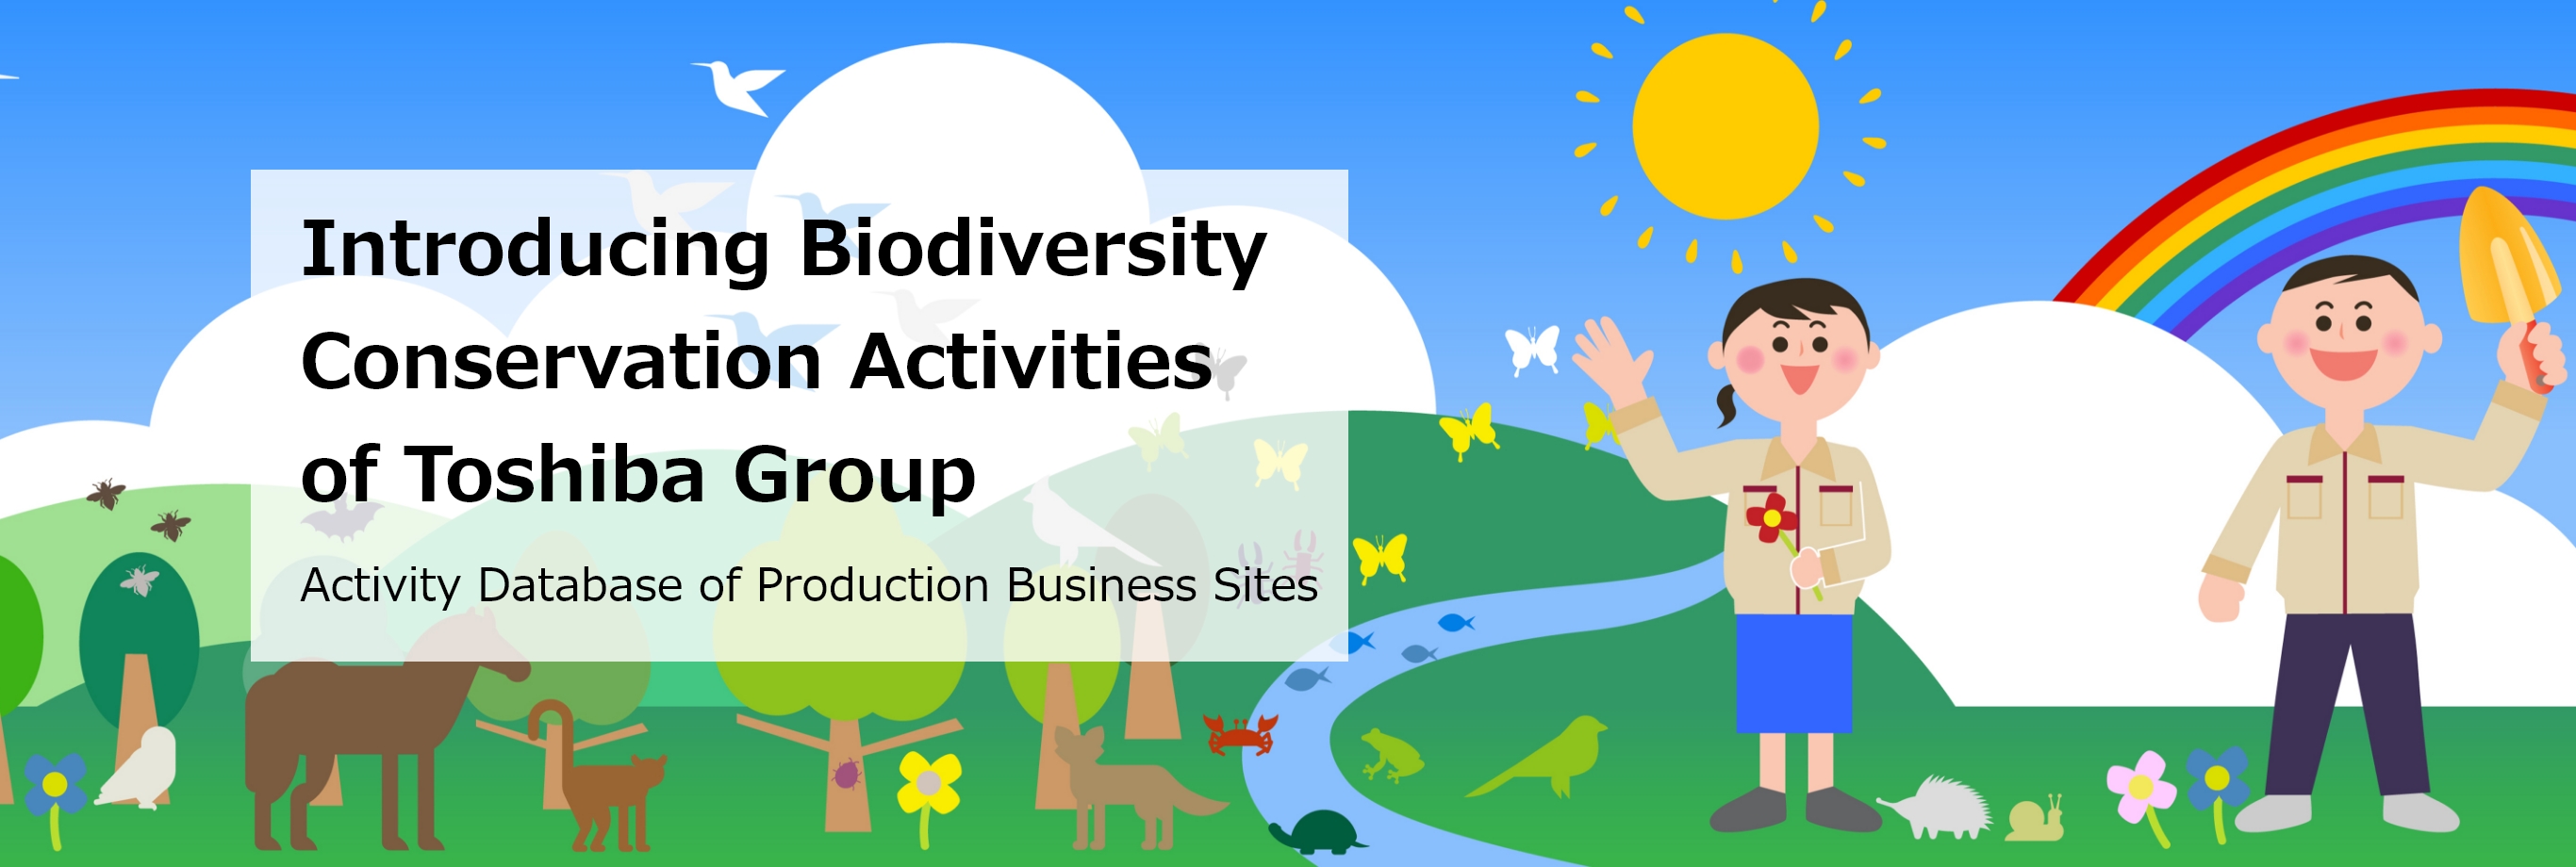 Introducing Biodiversity Conservation Activities of Toshiba Group